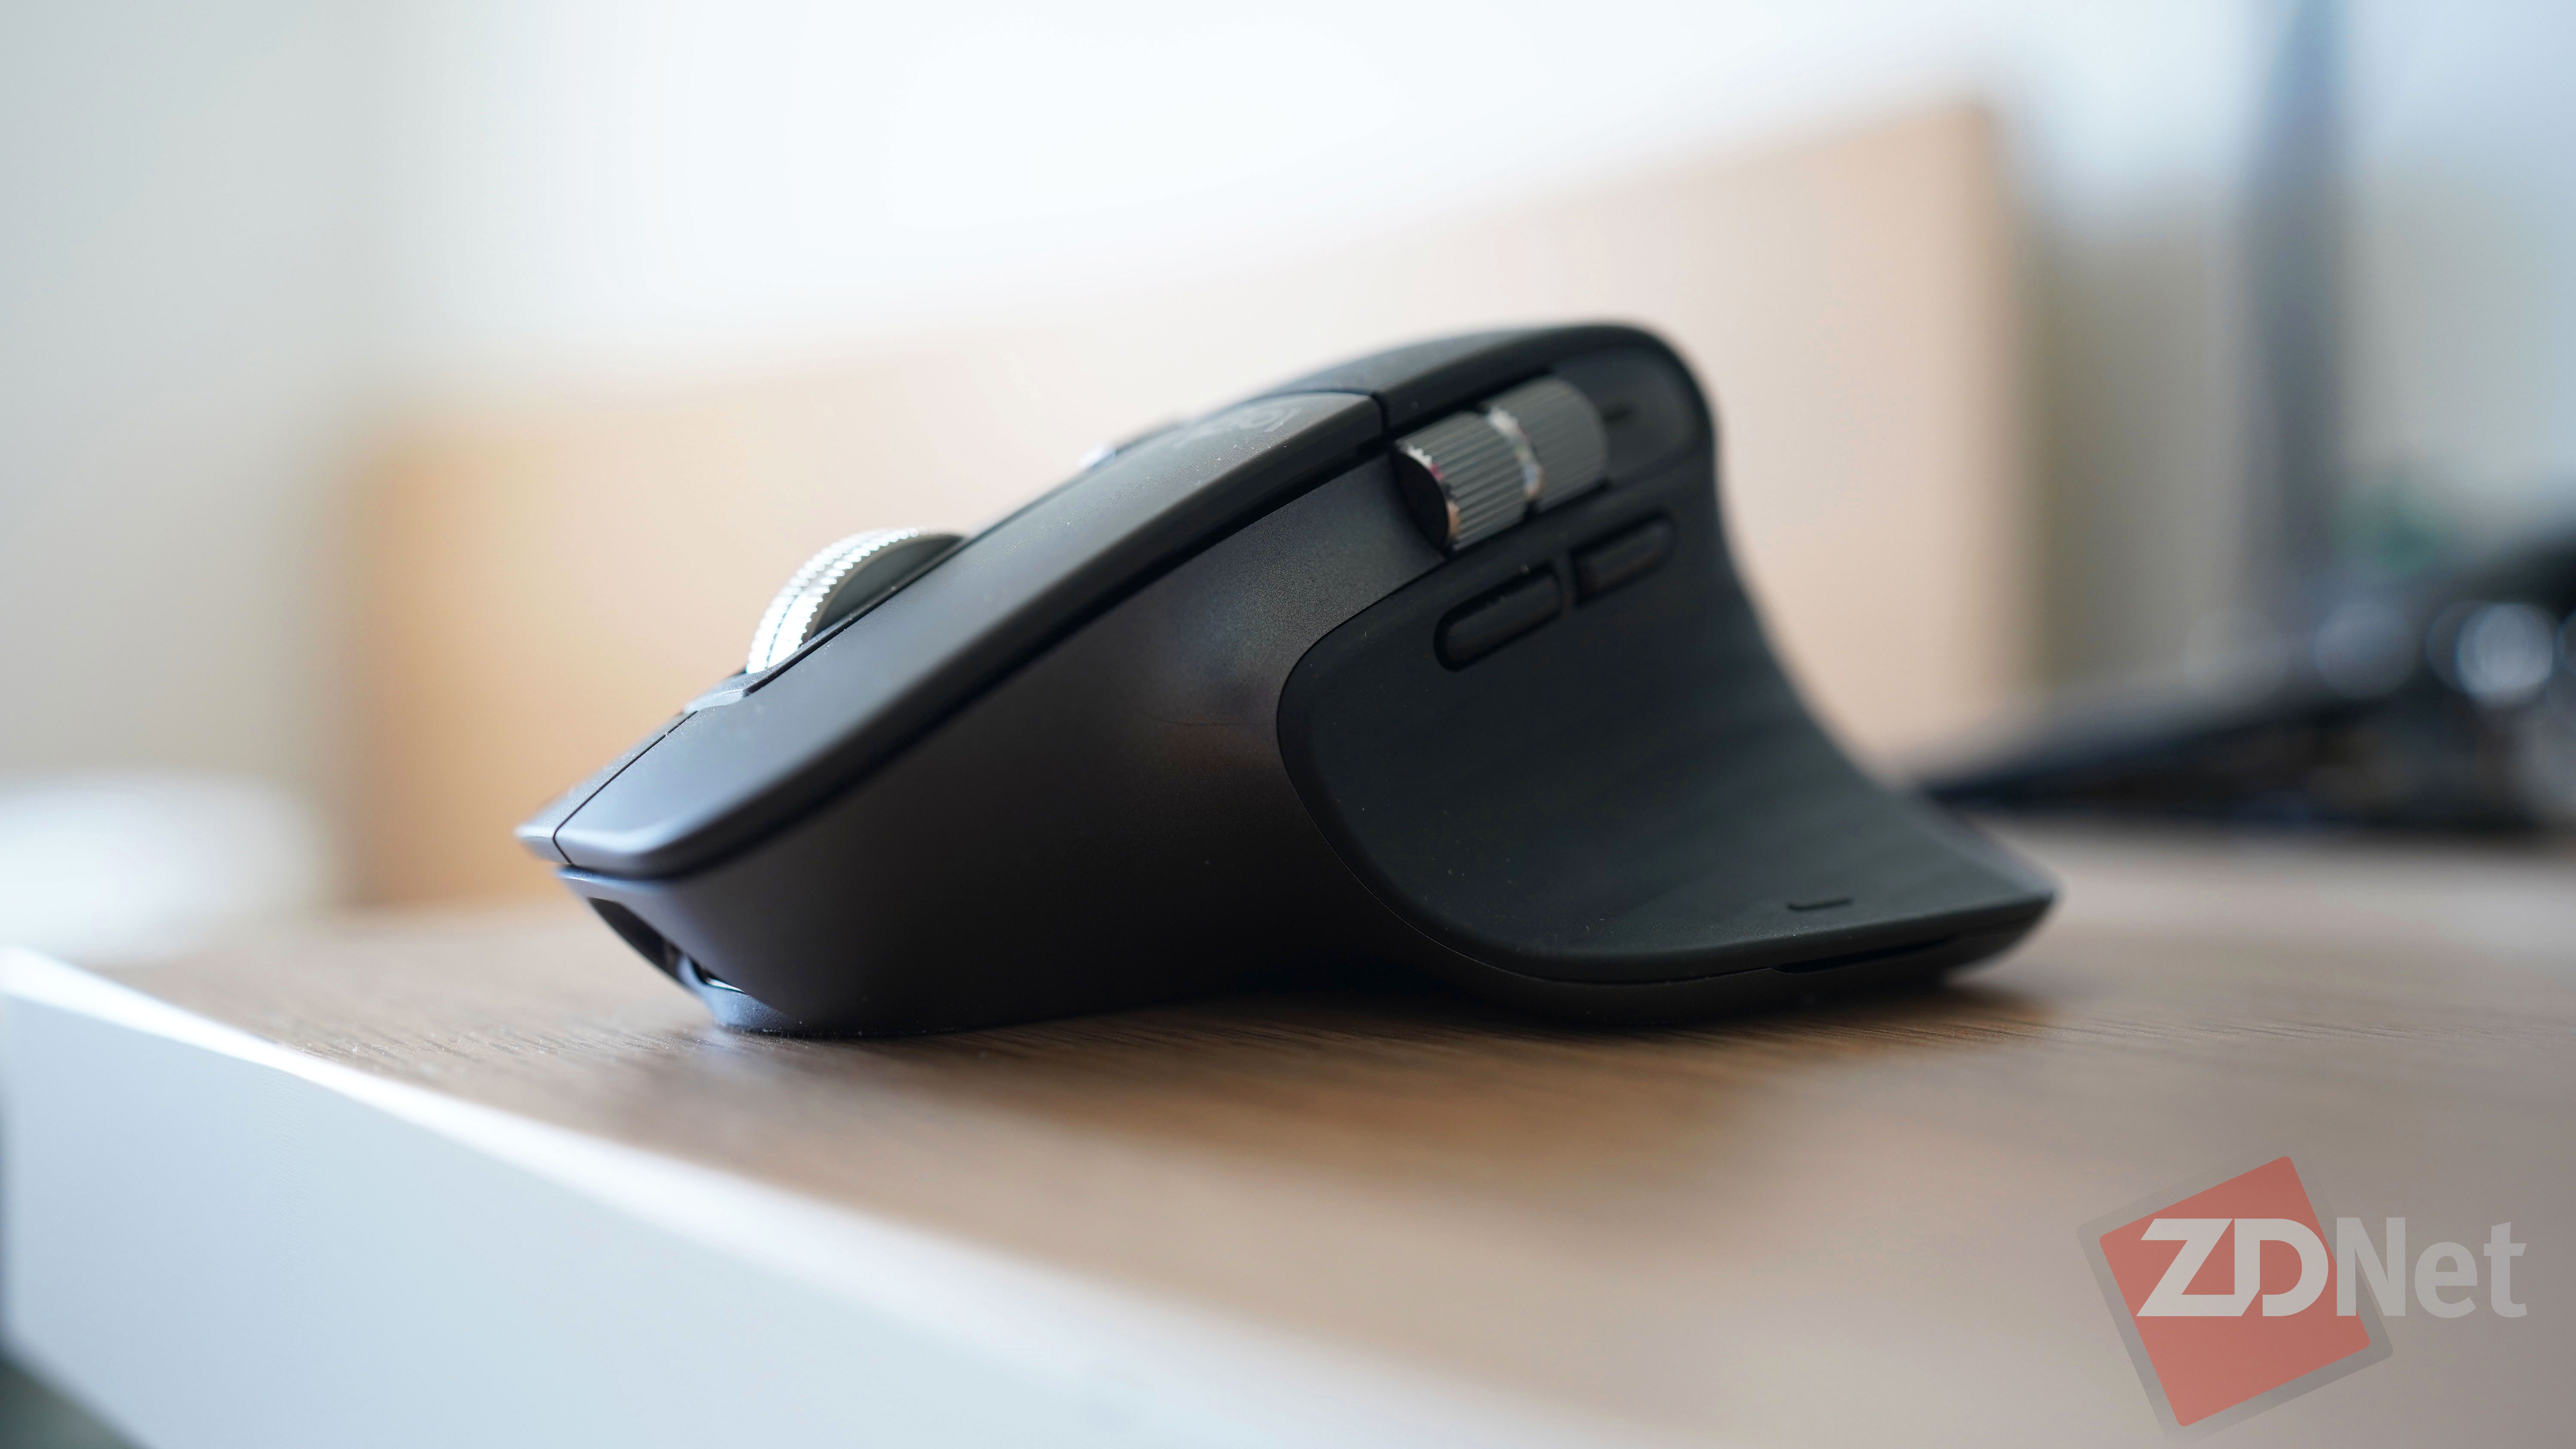 logitech vs microsoft mouse: What You Need to Know Before Buying